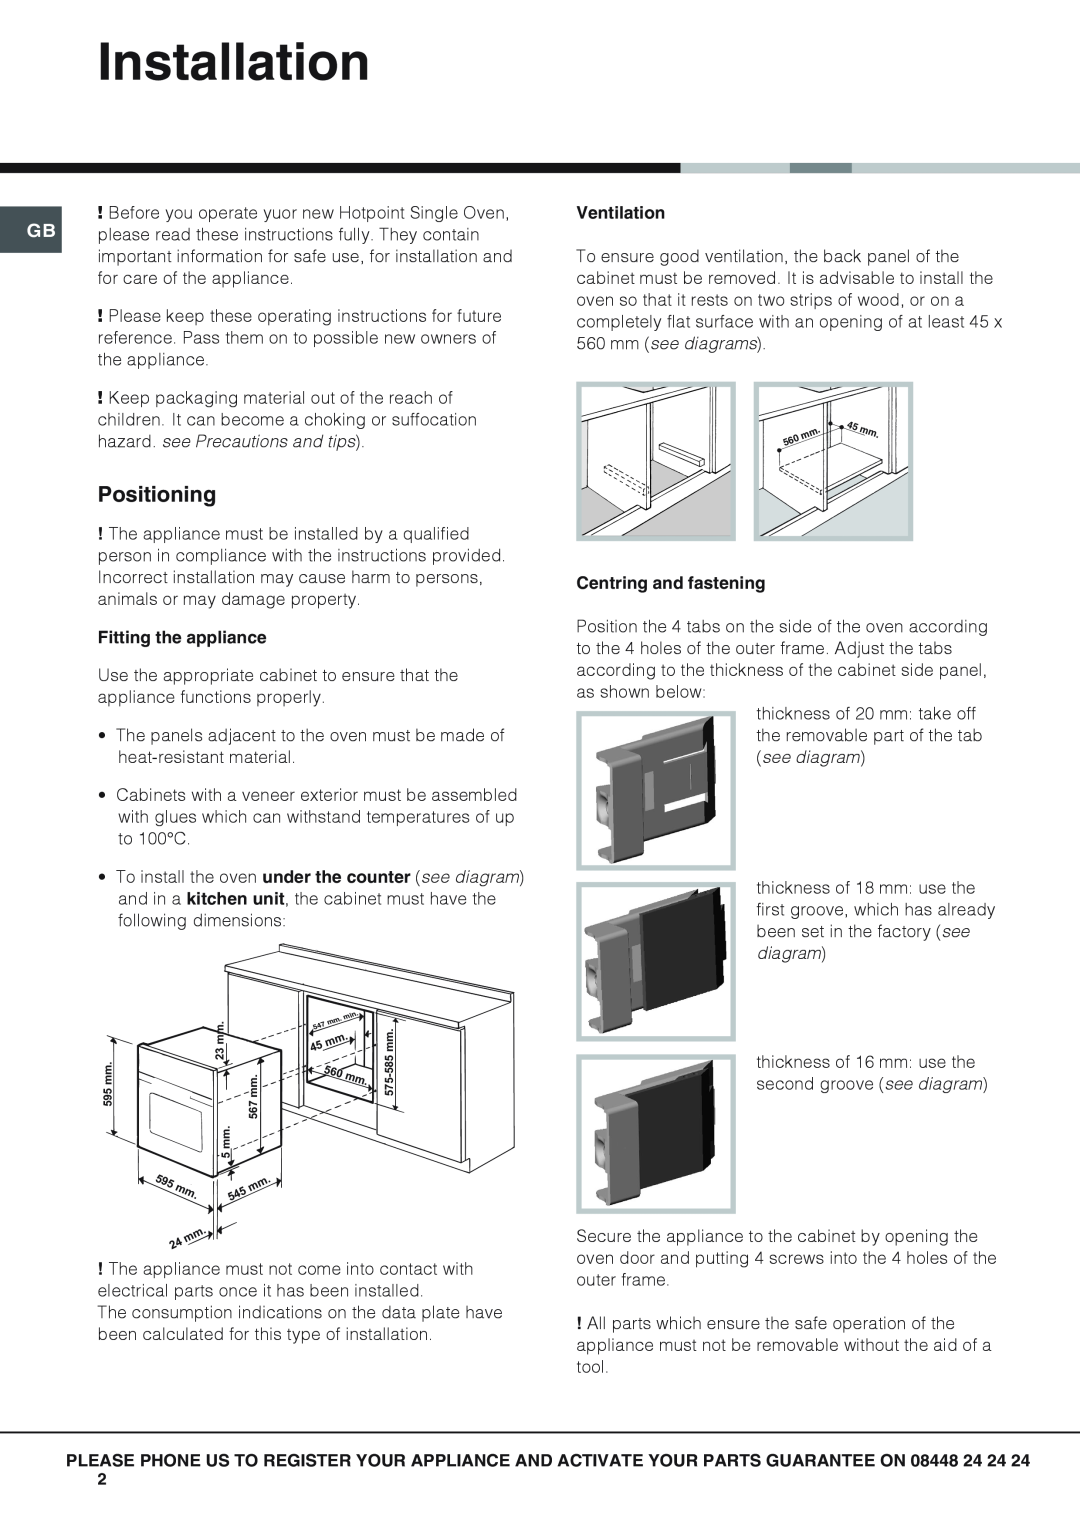 Hotpoint SY56 Installation, hazard. see Precautions and tips, Fitting the appliance, Ventilation, Centring and fastening 